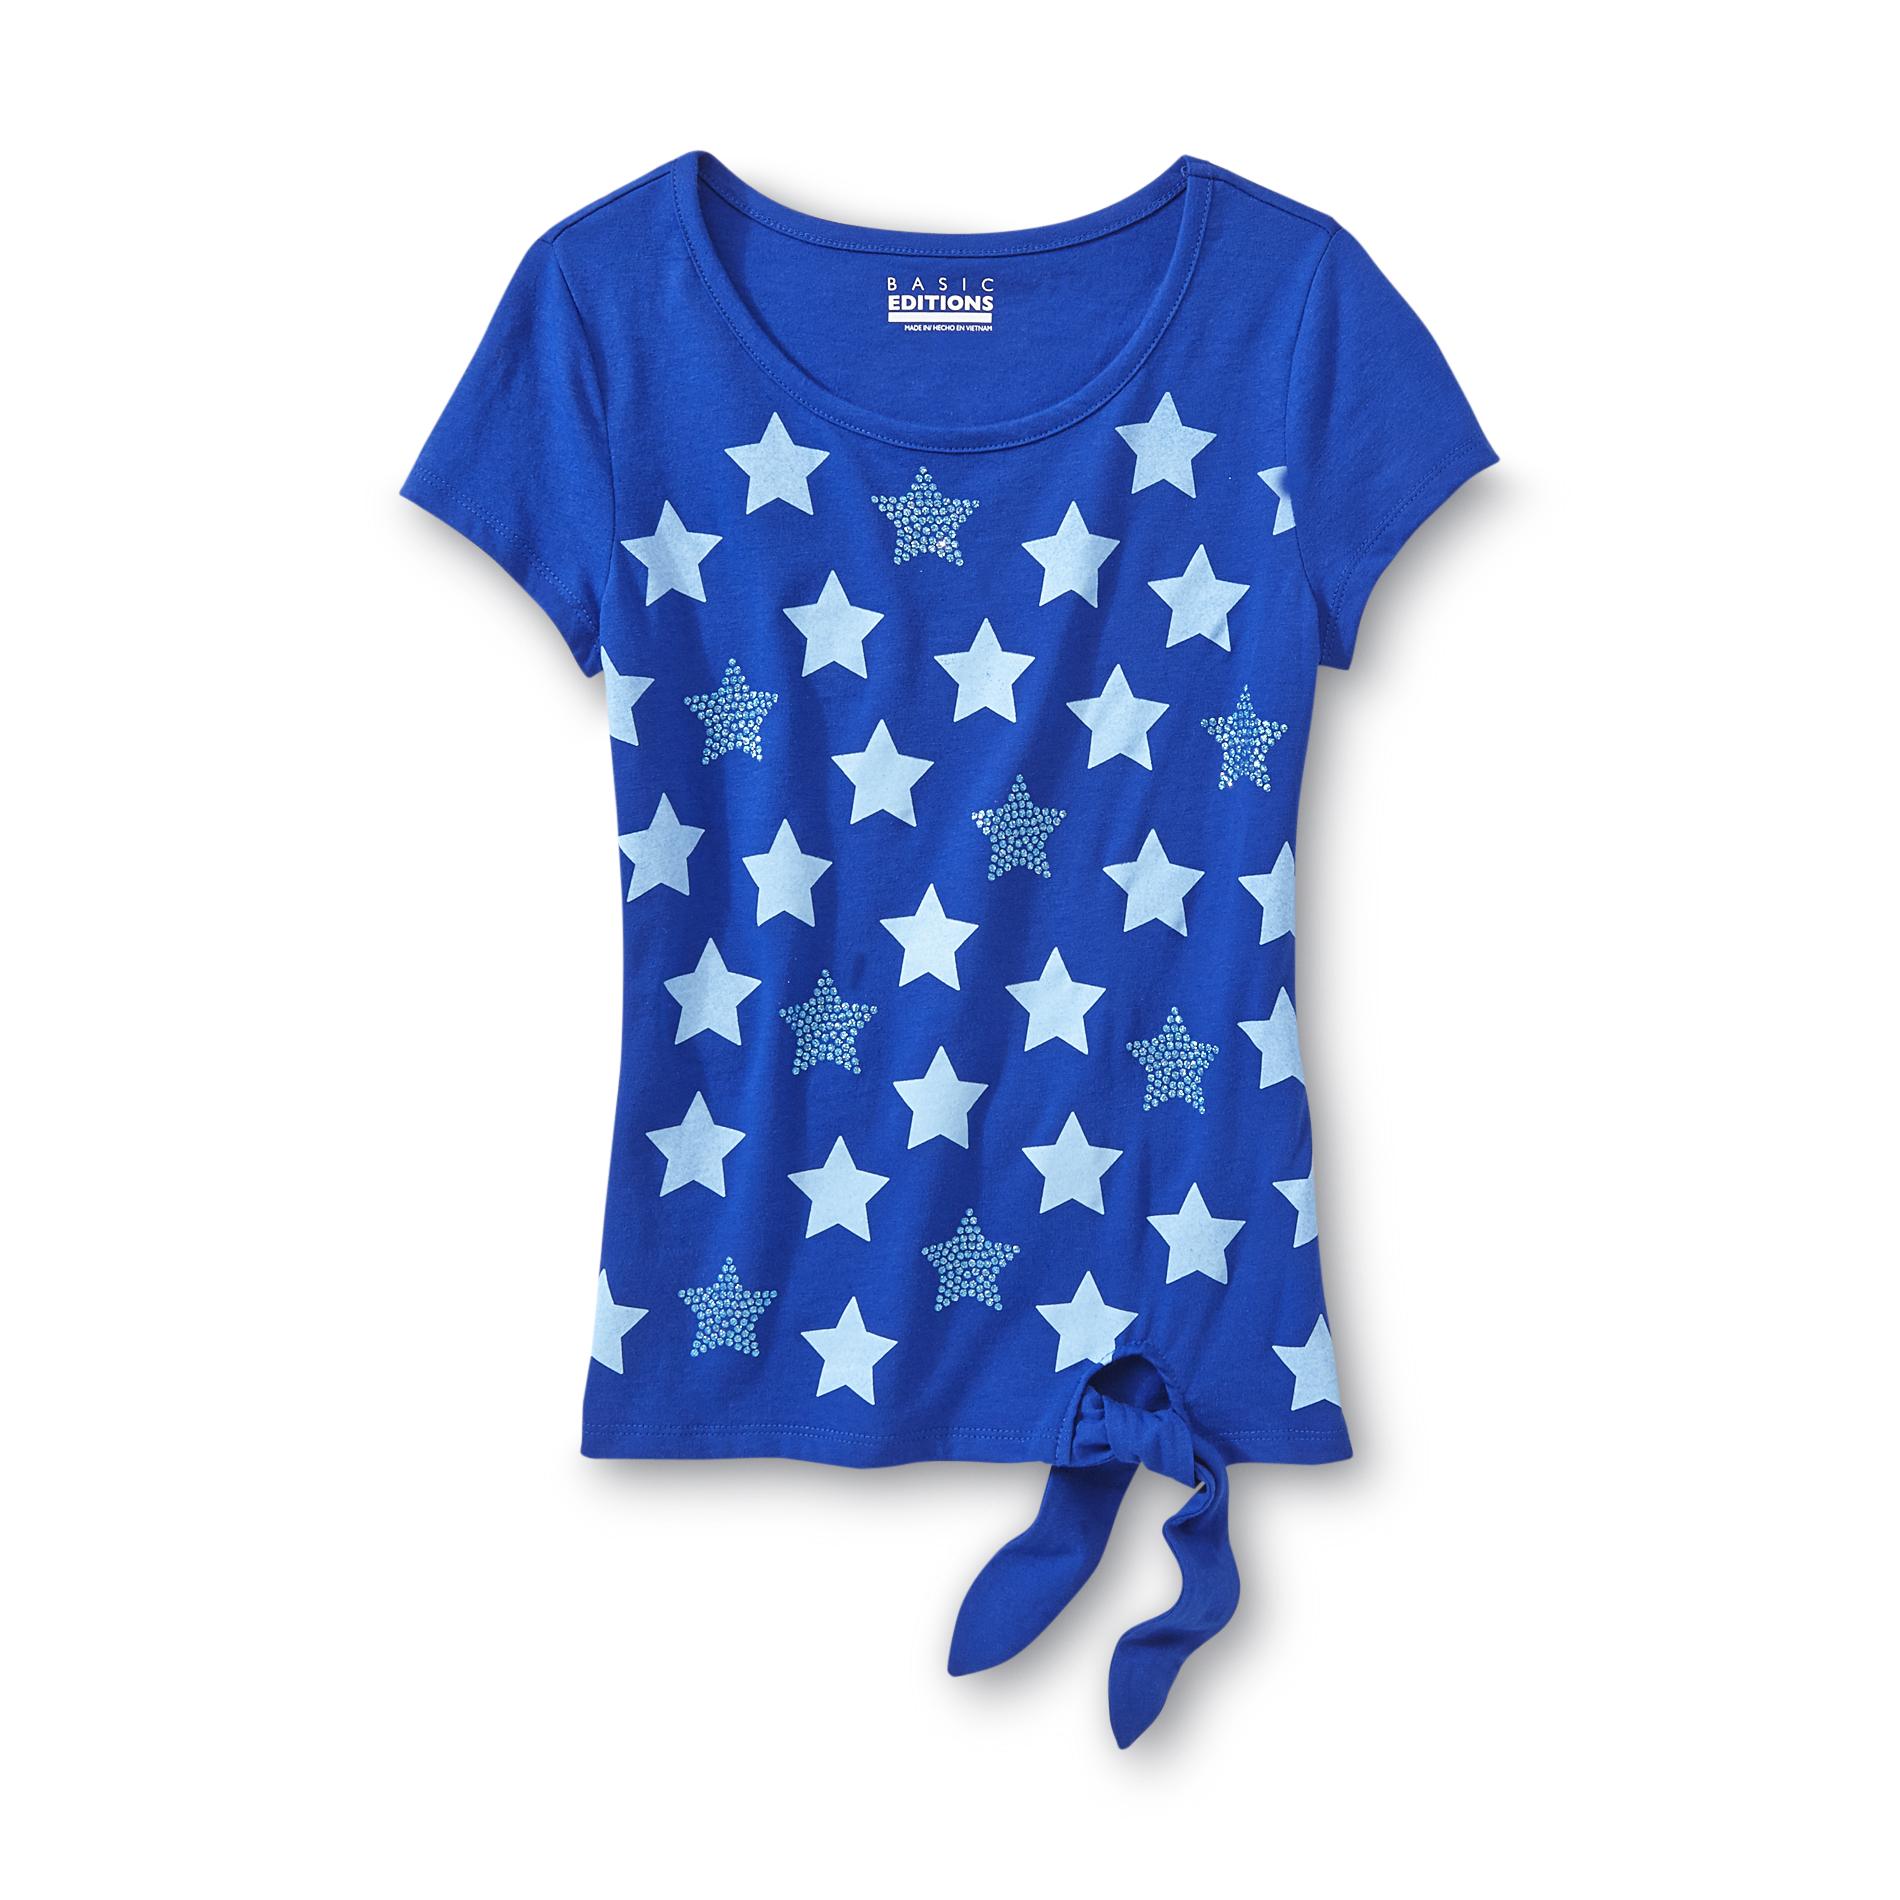 Basic Editions Girl's Spangled Tie-Front T-Shirt - Star